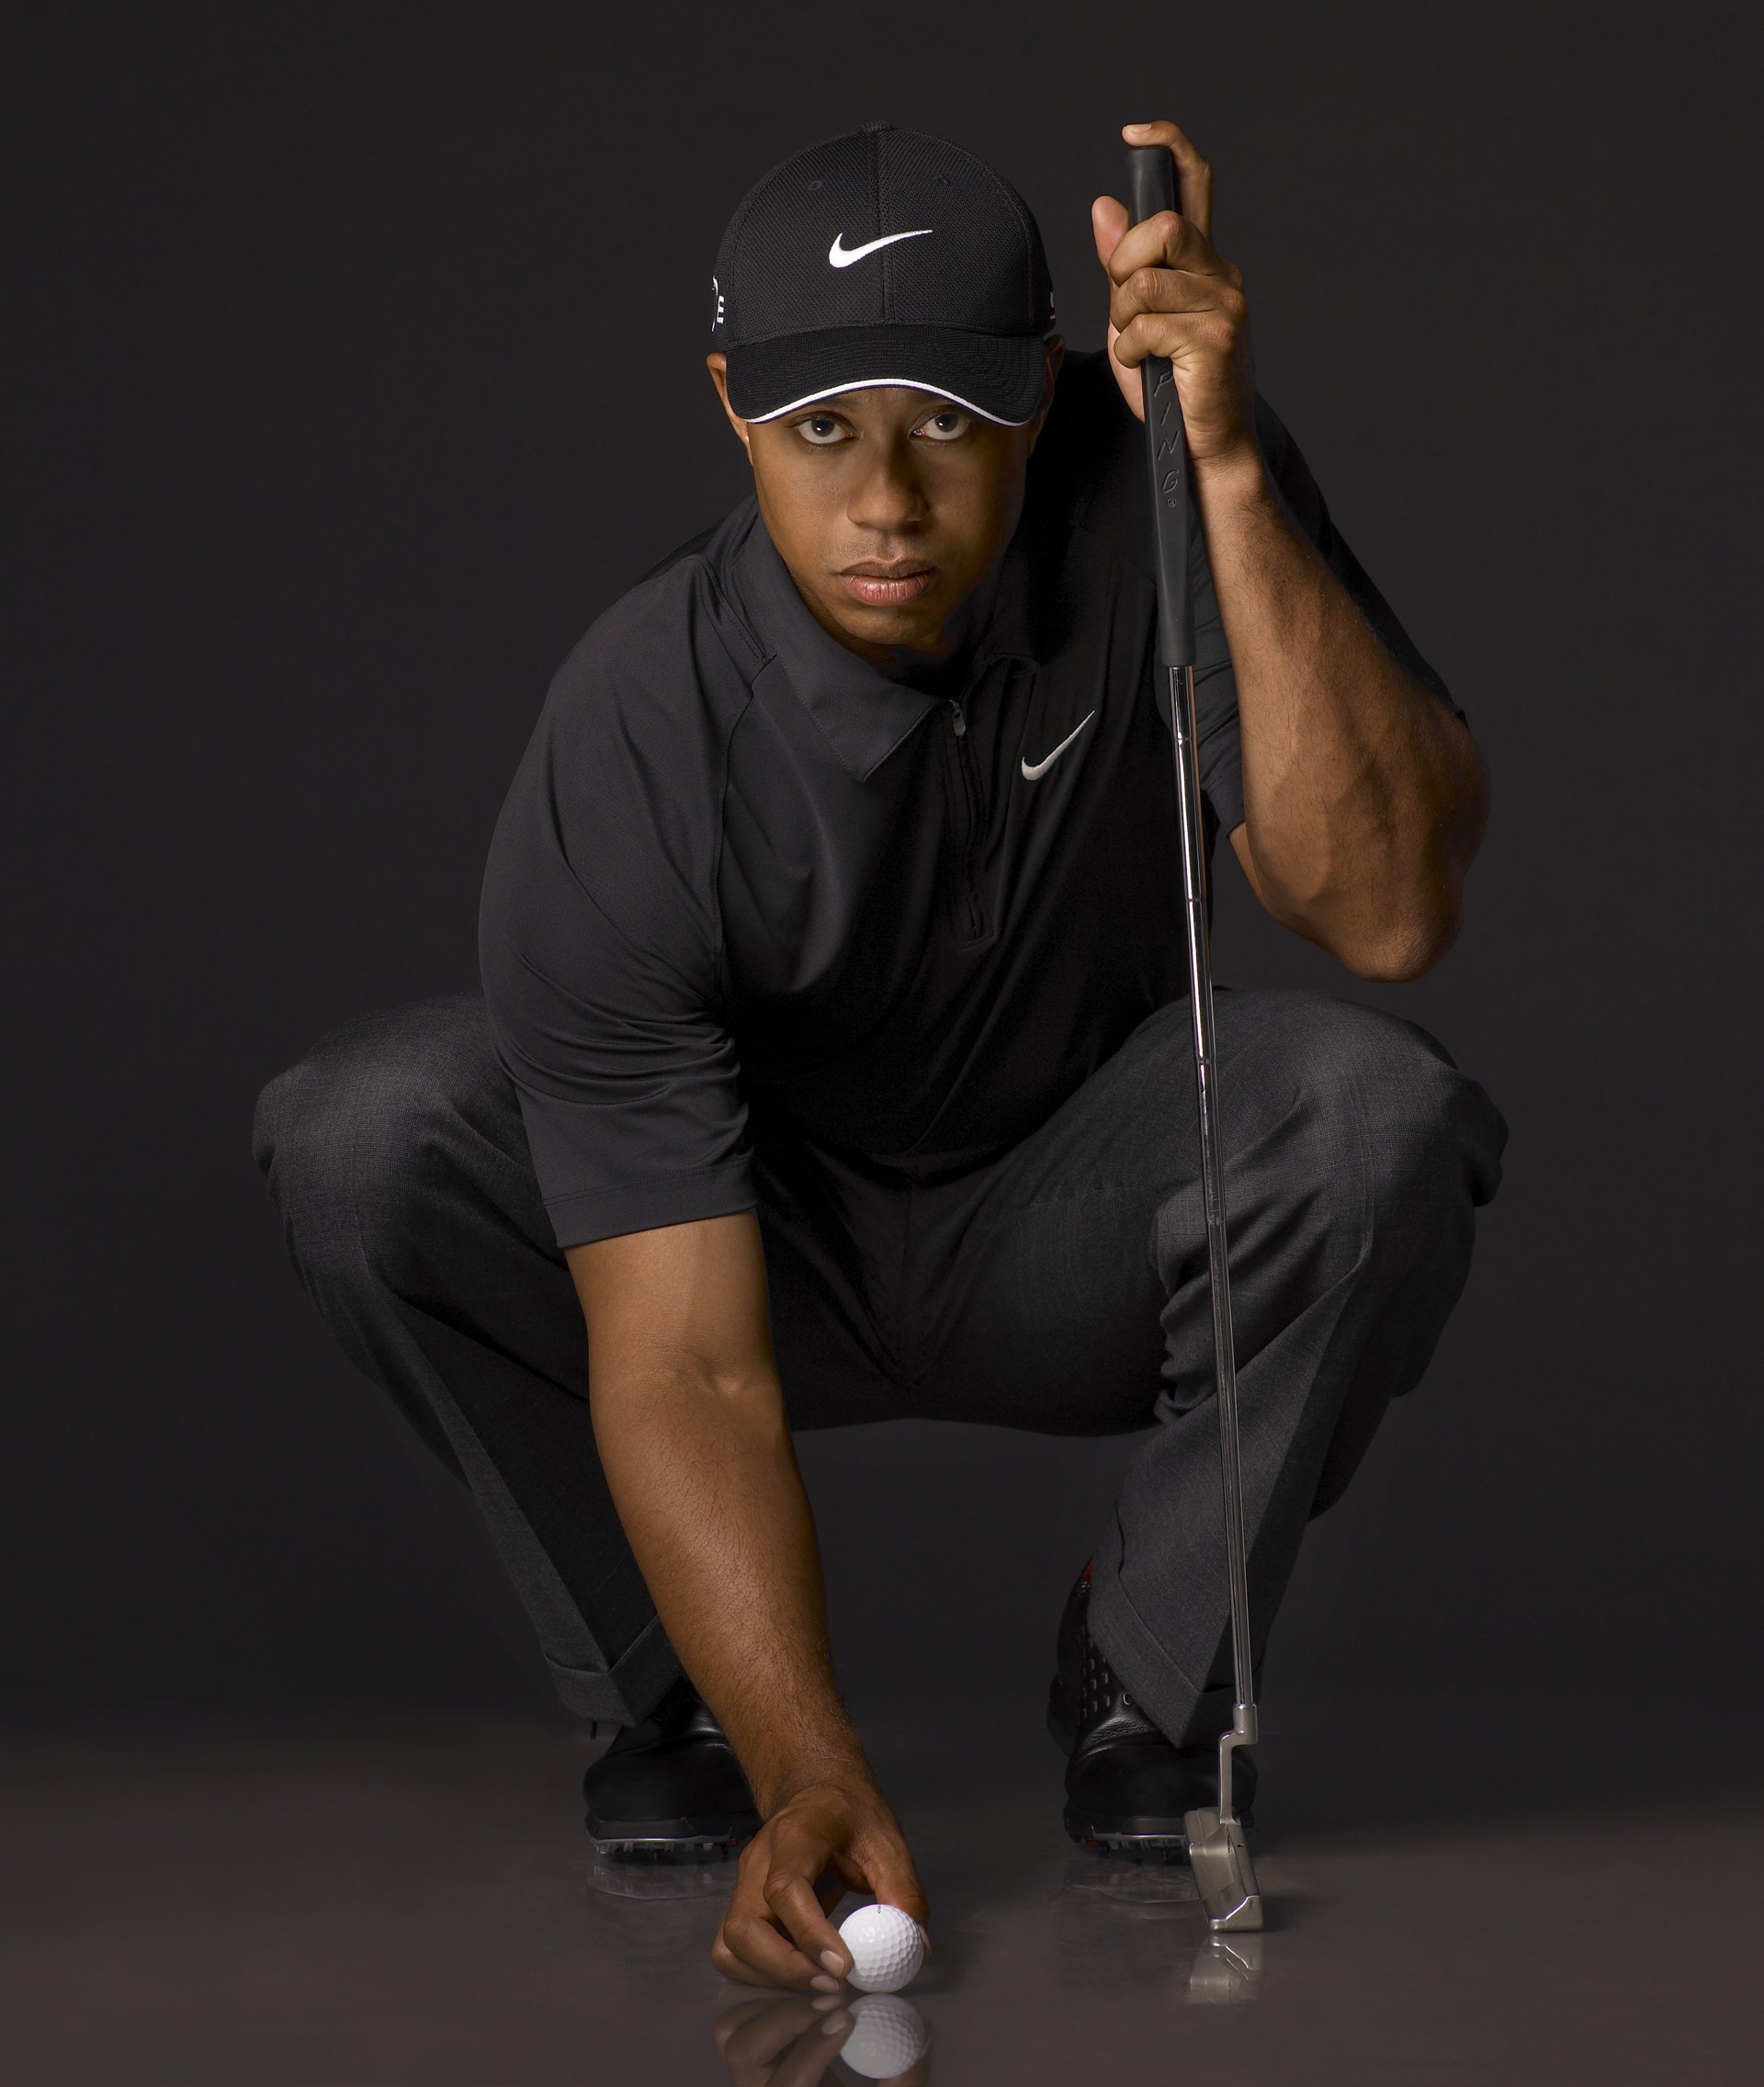 07029 Tiger Woods Crouched Putter and Golfball Color by Timothy White